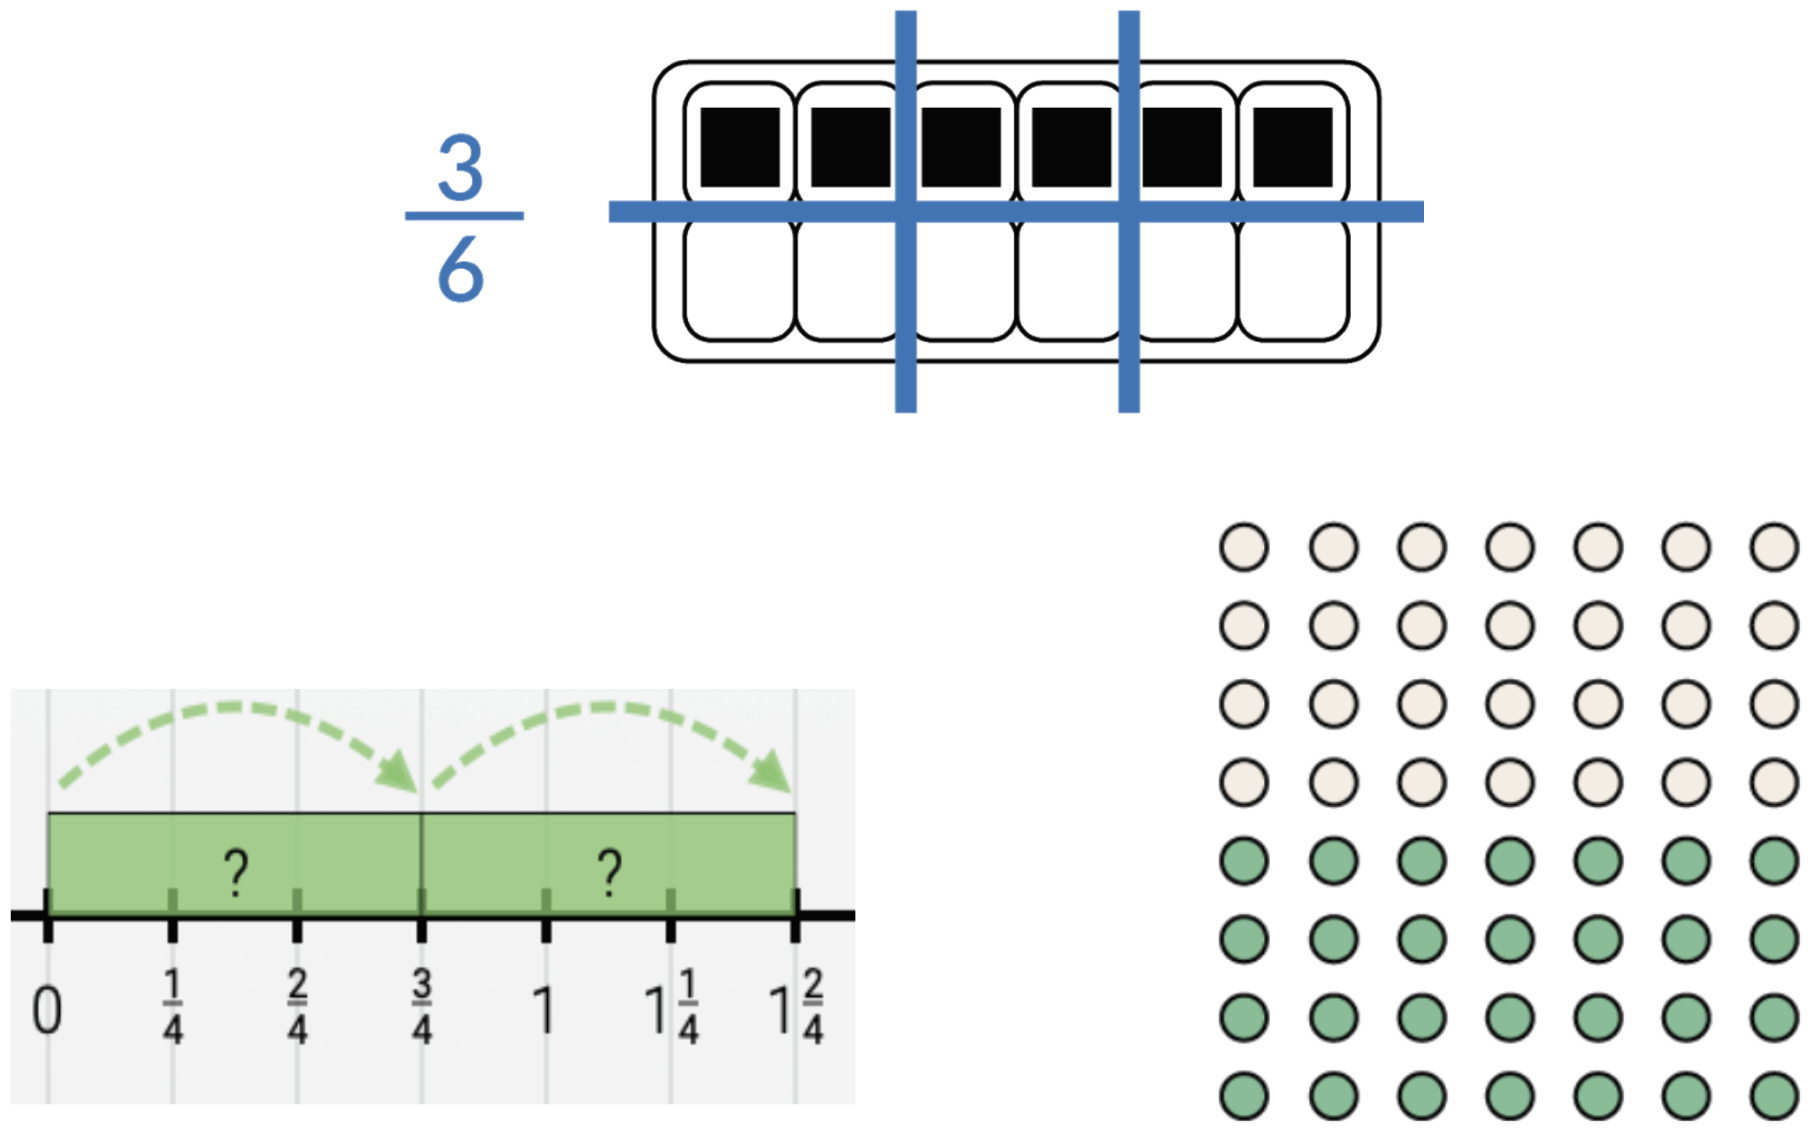 1st, an egg carton divided into 6 sections. the fraction 3-sixths. Next, a number line showing jumps from 0 to 3-fourths to 1 & 2-fourths. Then, an 8 by 8 grid of dots. top half is white, bottom half is green